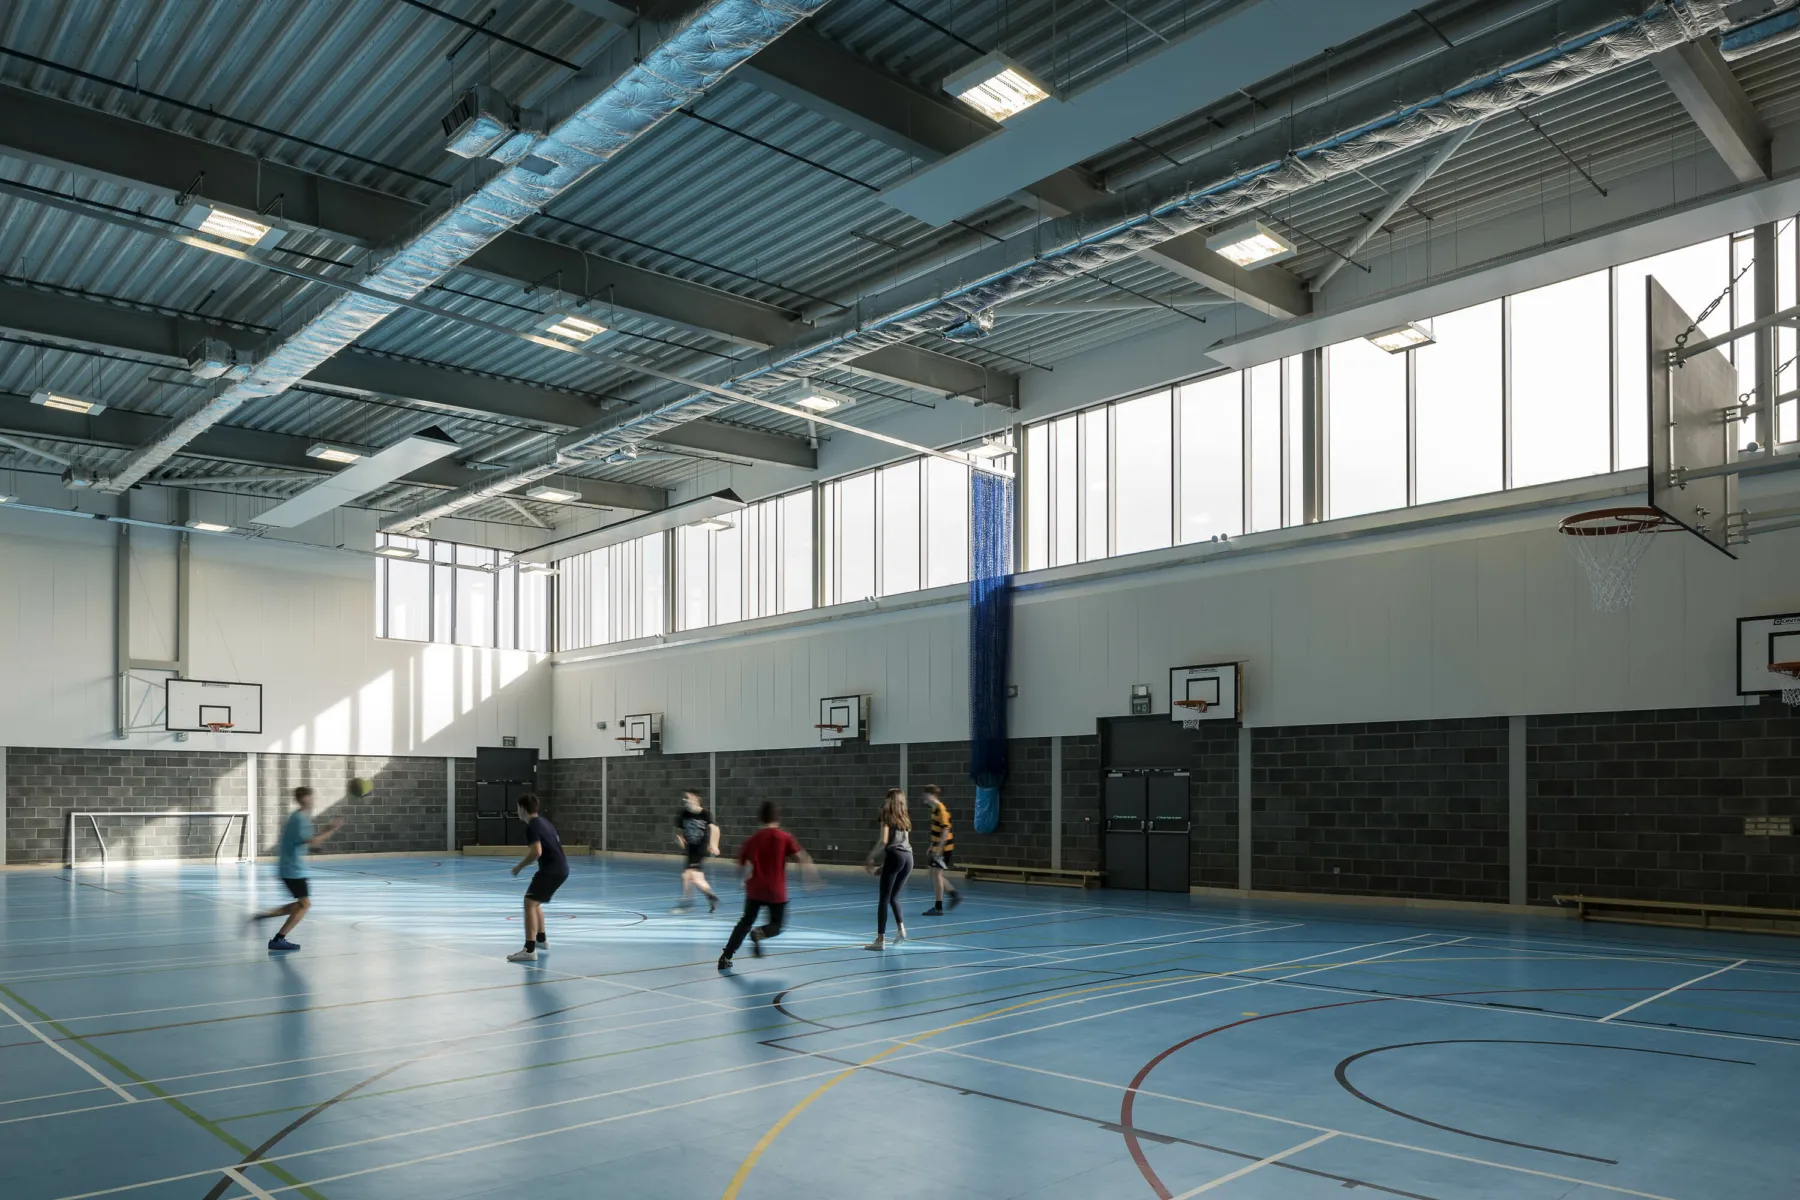 Inside a new build multipurpose games hall at Garnock School, Scotland. A group of pupils play footbal. The floor is marked for different sports including football and basketball.